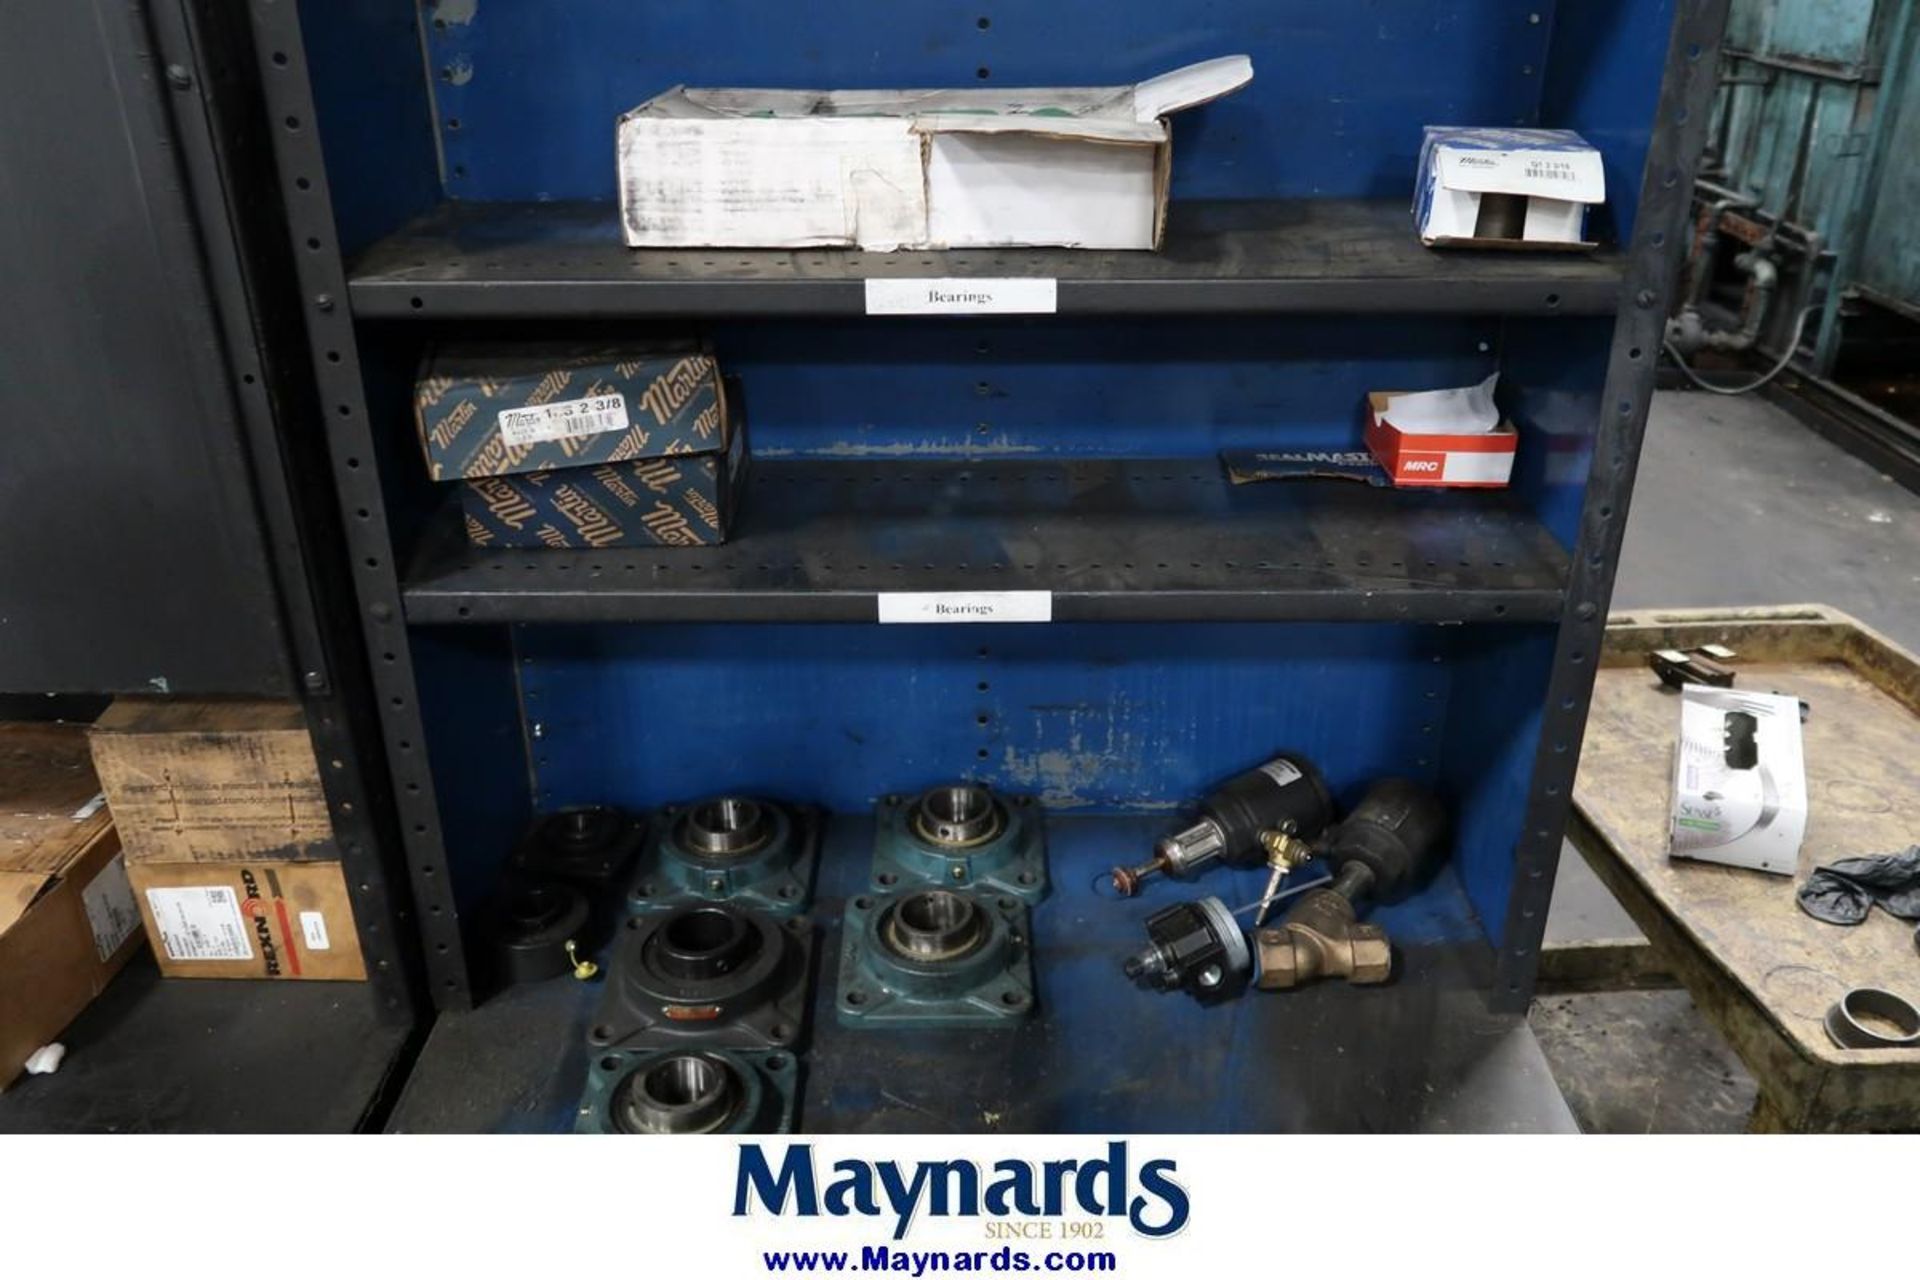 Adjustable Steel Shelving Units with Contents of Heat Treat Spare Parts - Image 7 of 16